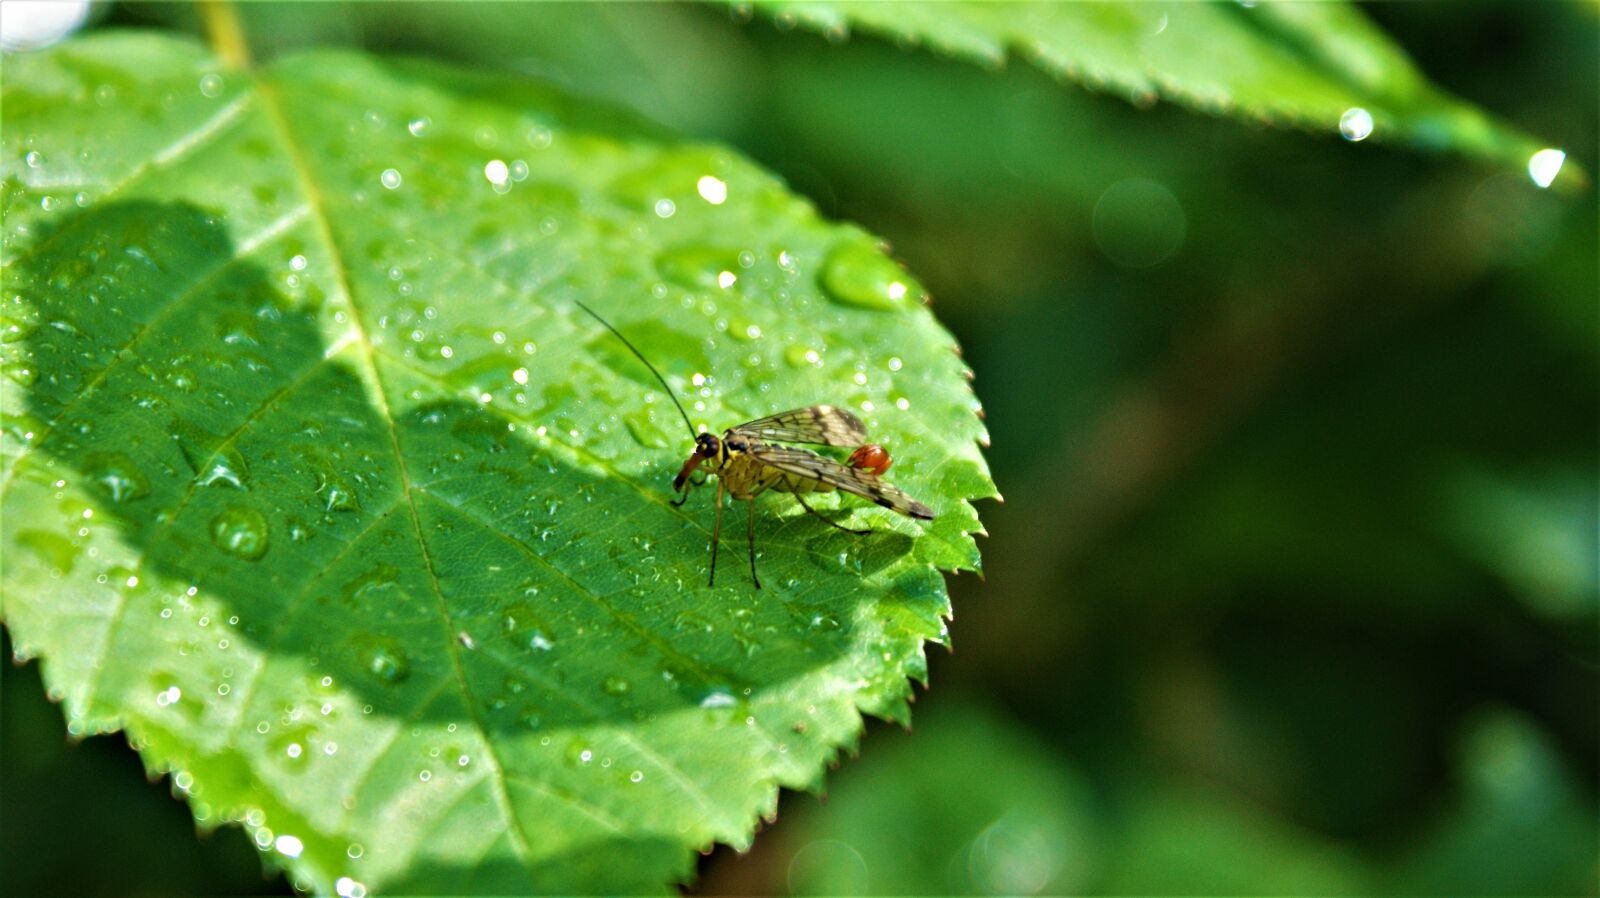 Sony Alpha DSLR-A350 sample photo. Insects, leaves, nature photography